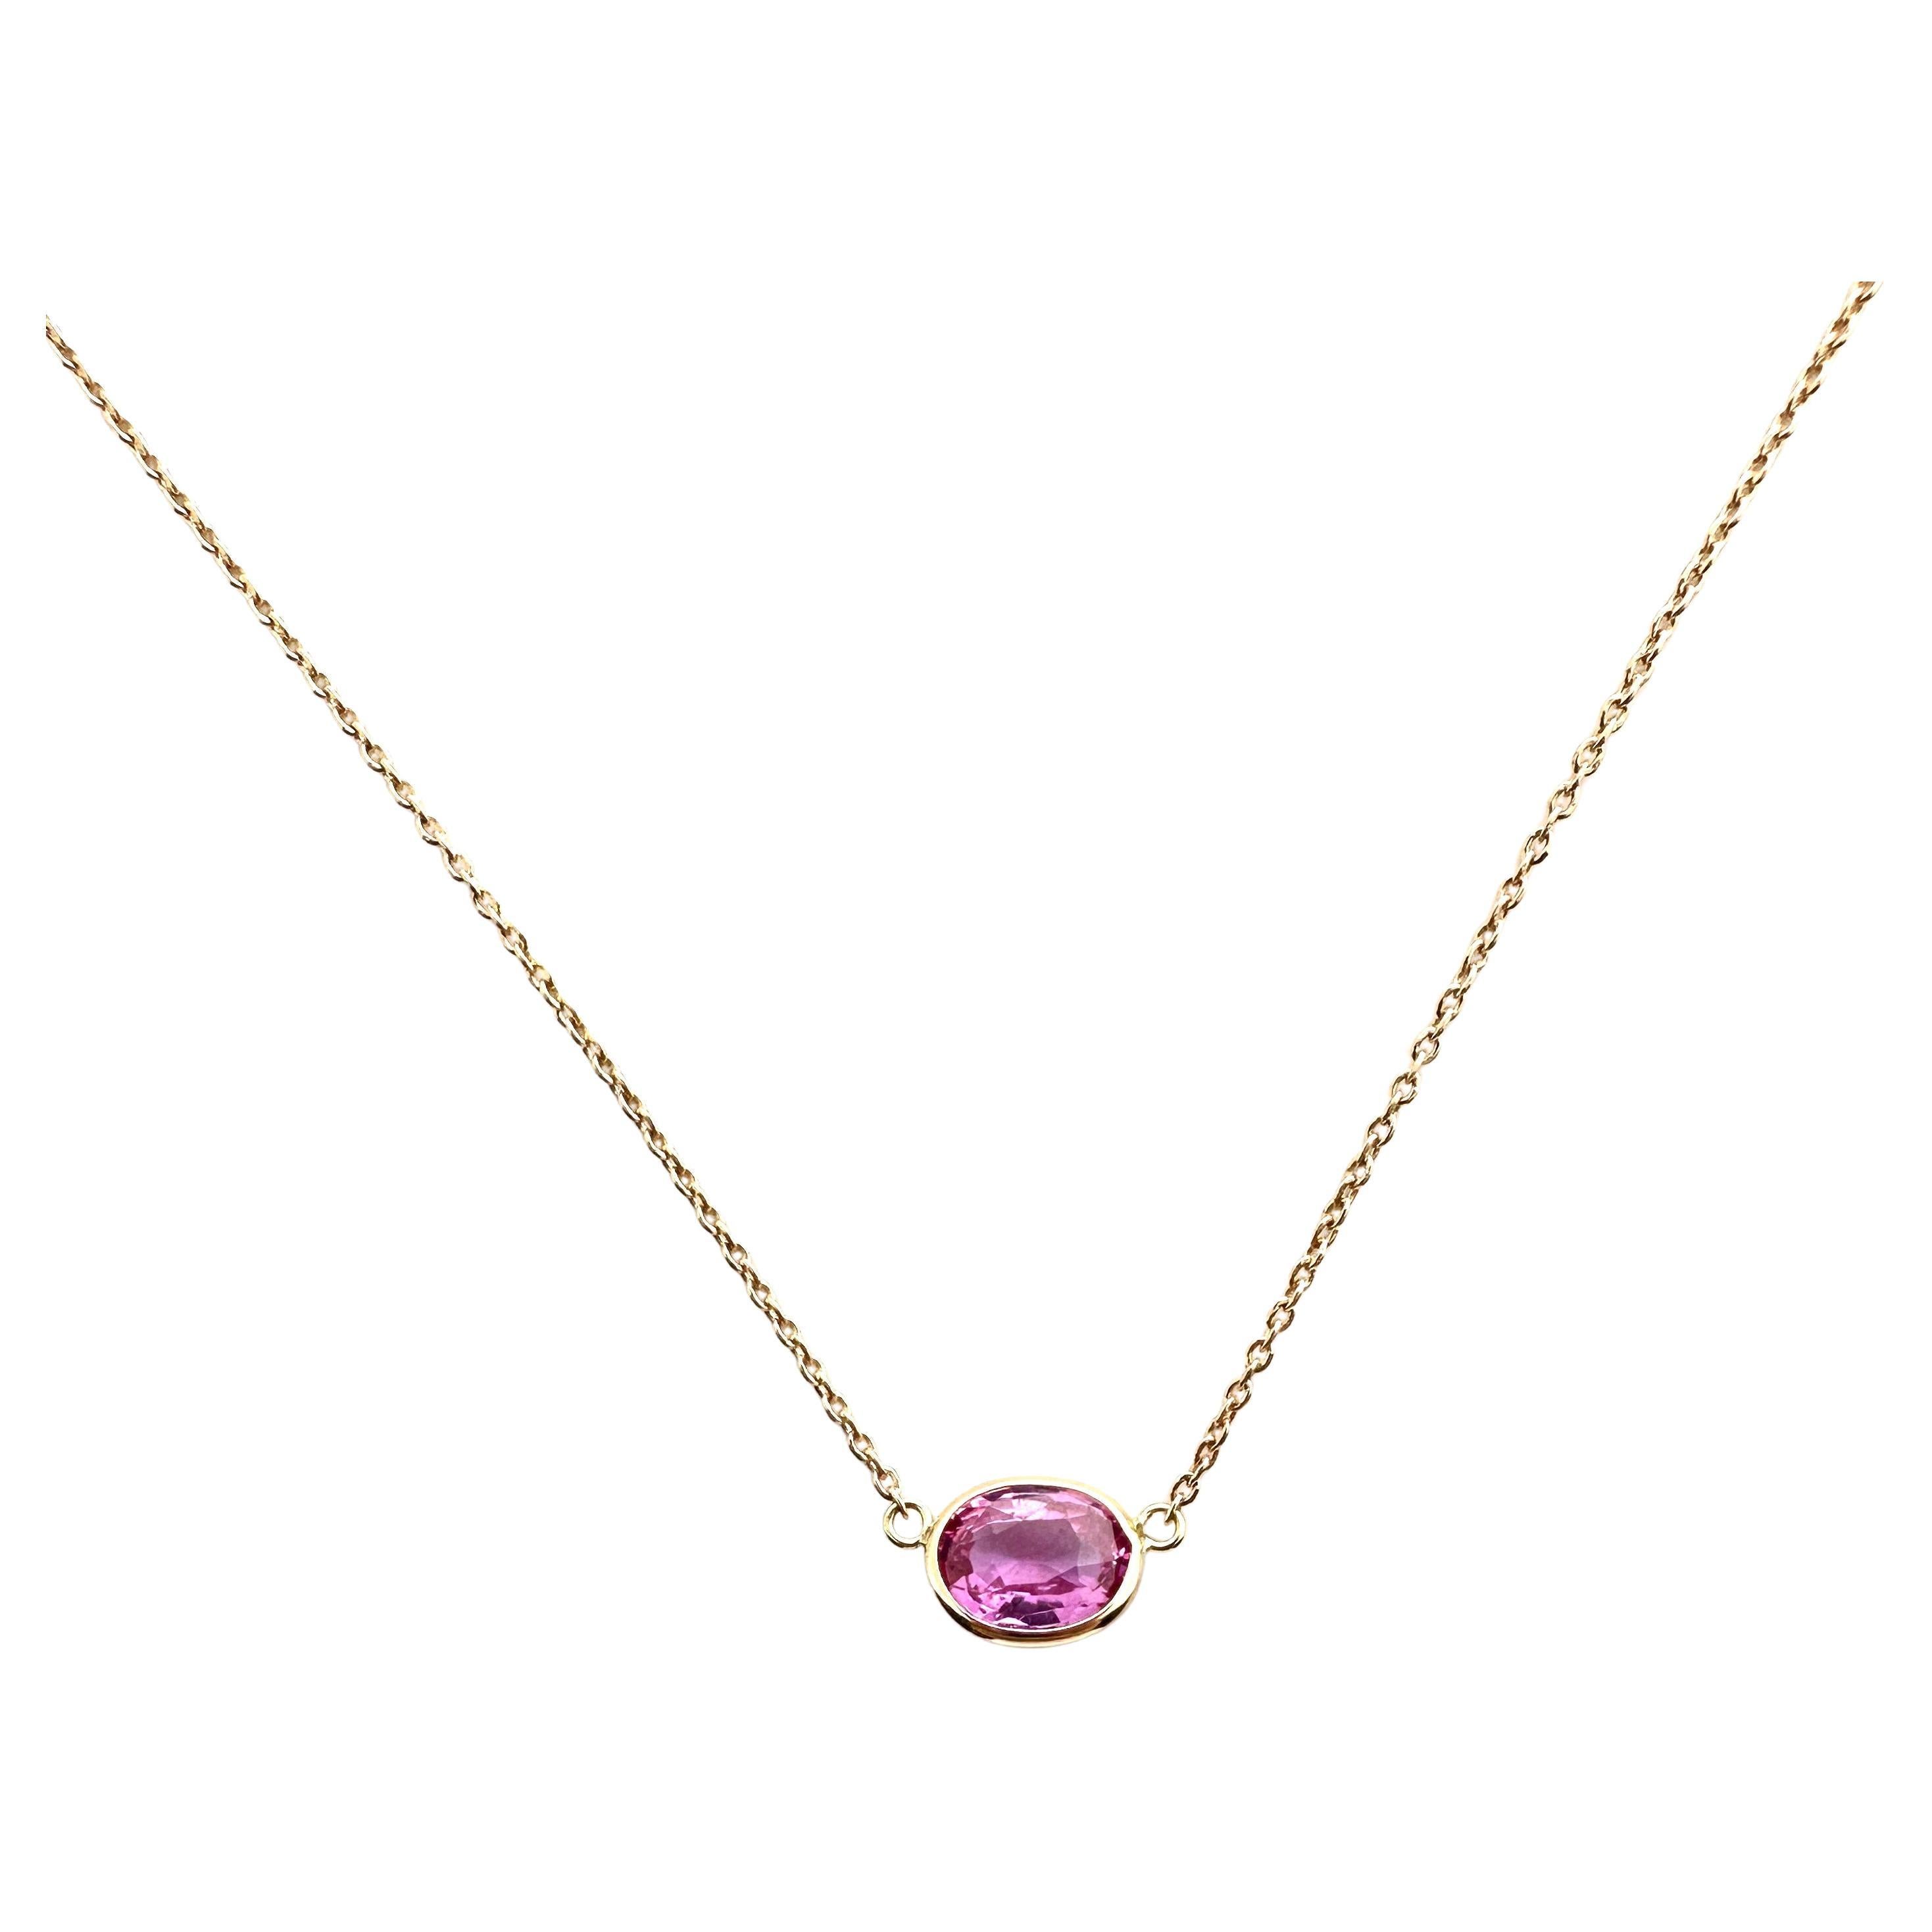 1.43 Carat Weight Pink Sapphire Oval Cut Solitaire Necklace in 14k Rose Gold For Sale